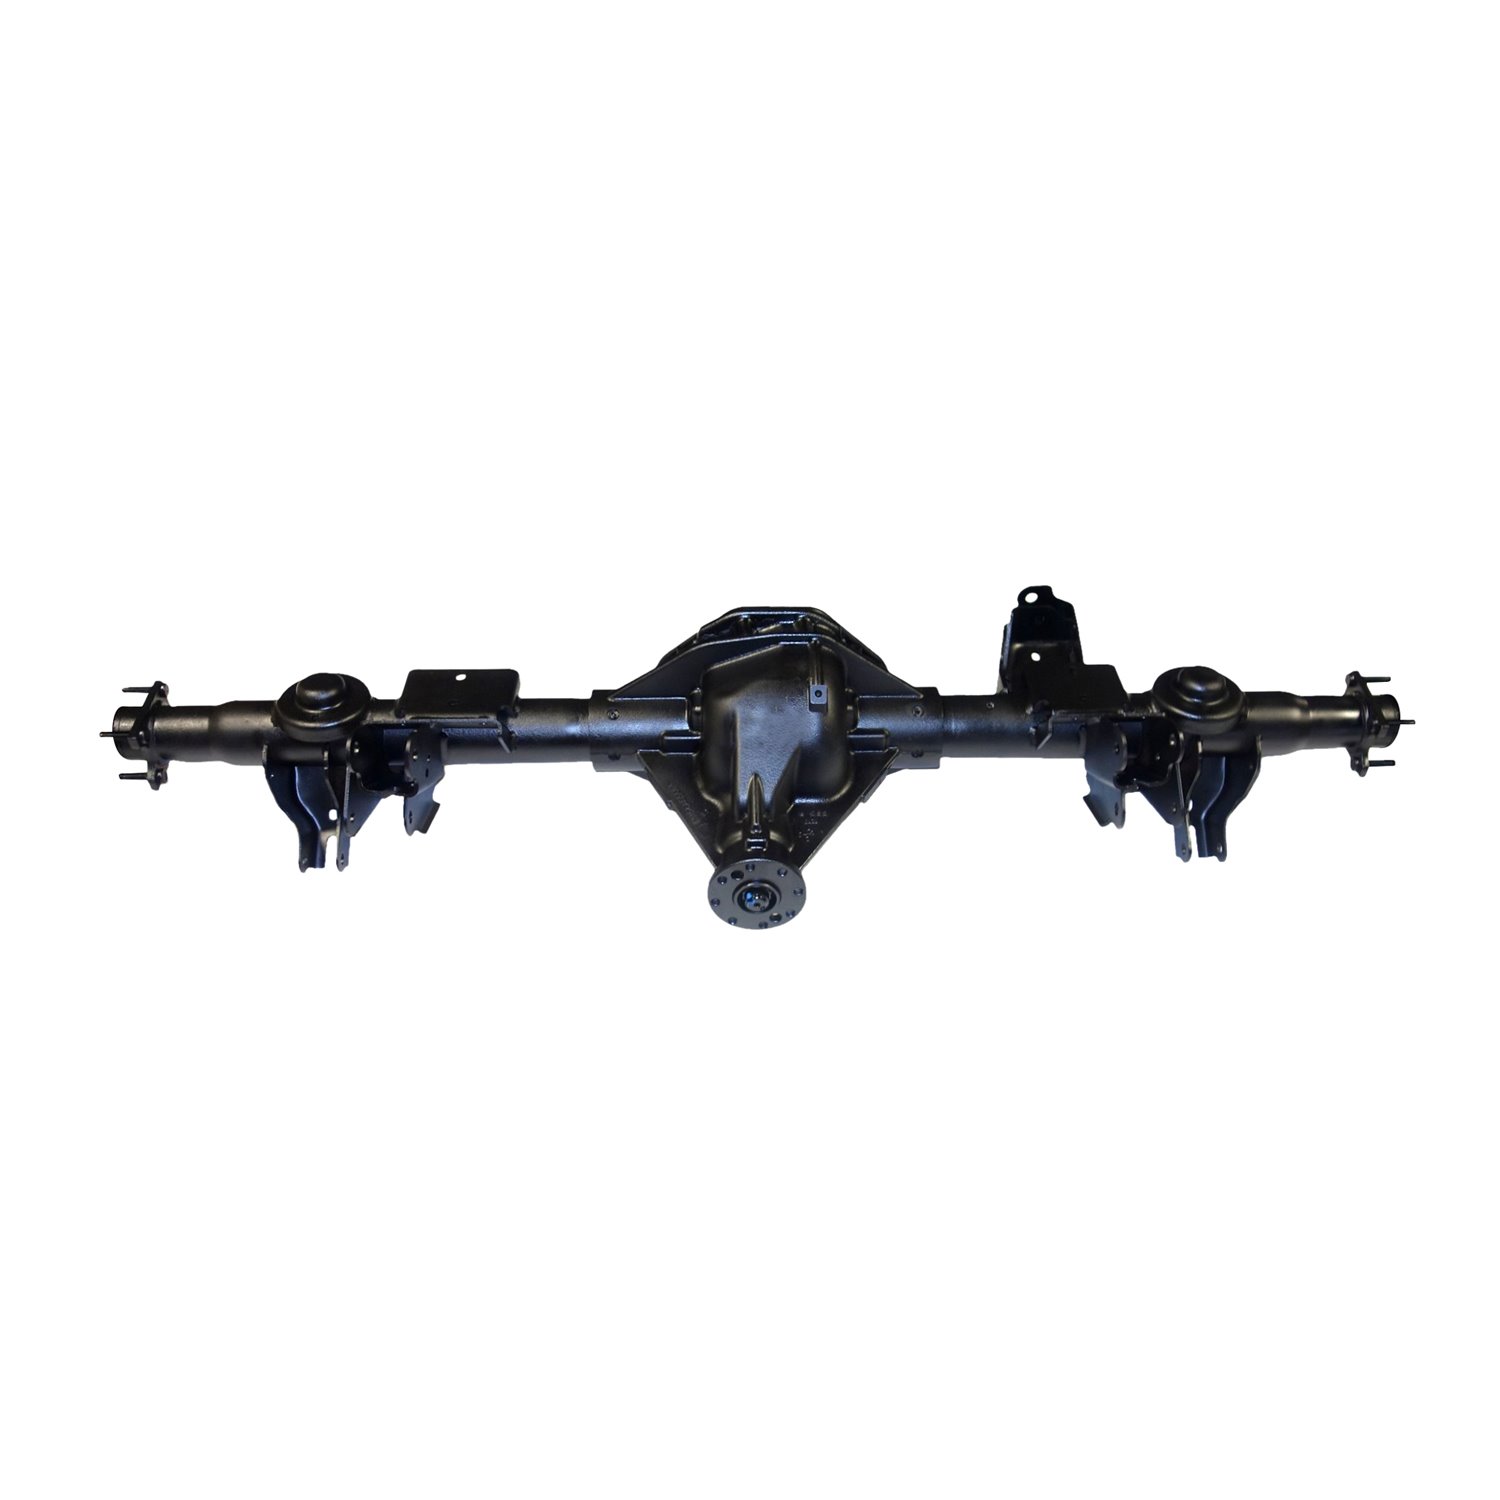 Remanufactured Complete Axle Assembly for Chrysler 9.25ZF 13-14 Dodge Ram 1500 3.21 Ratio